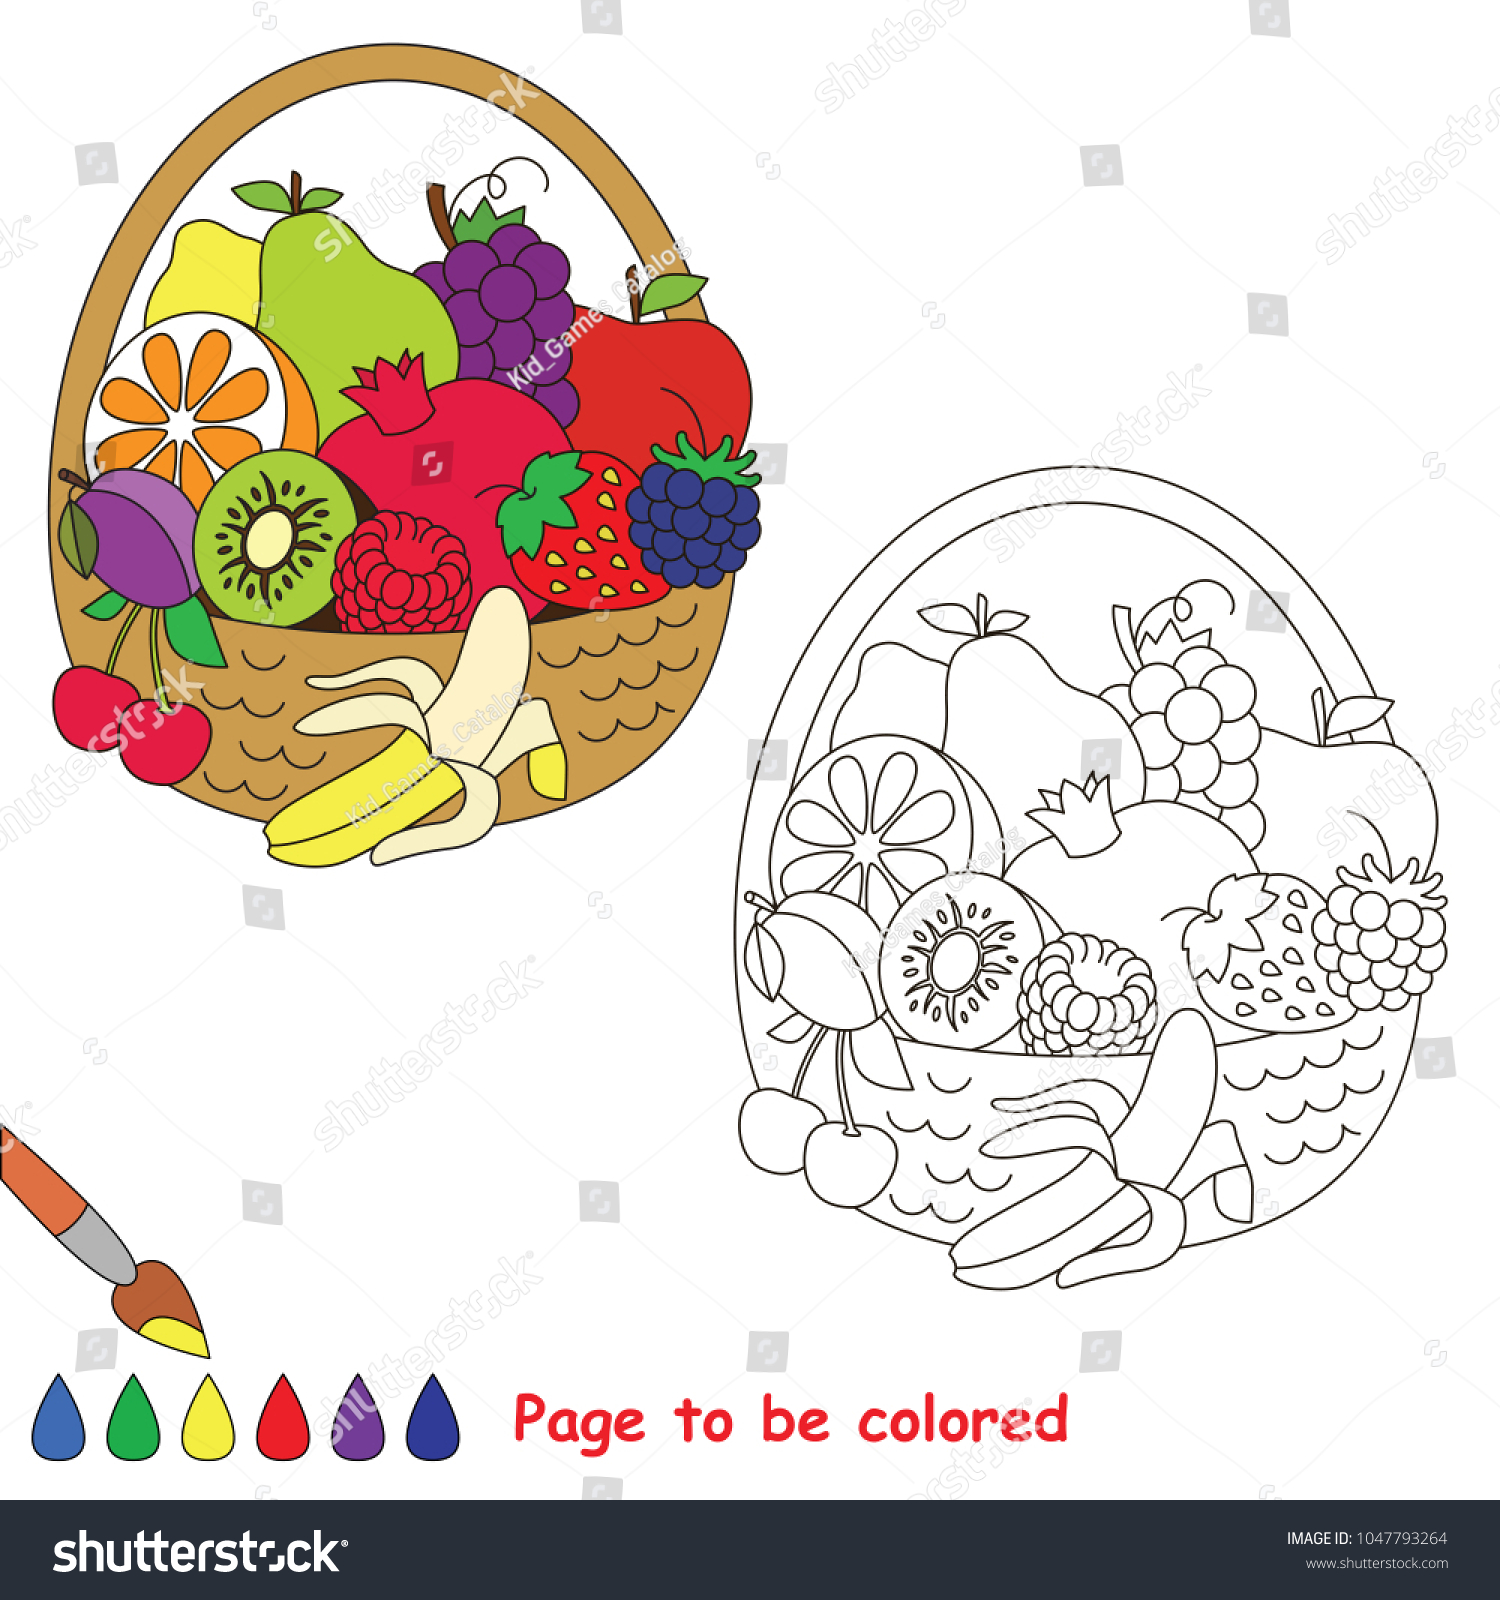 Fruit Basket Be Colored Coloring Book Stock Vector Royalty Free 1047793264